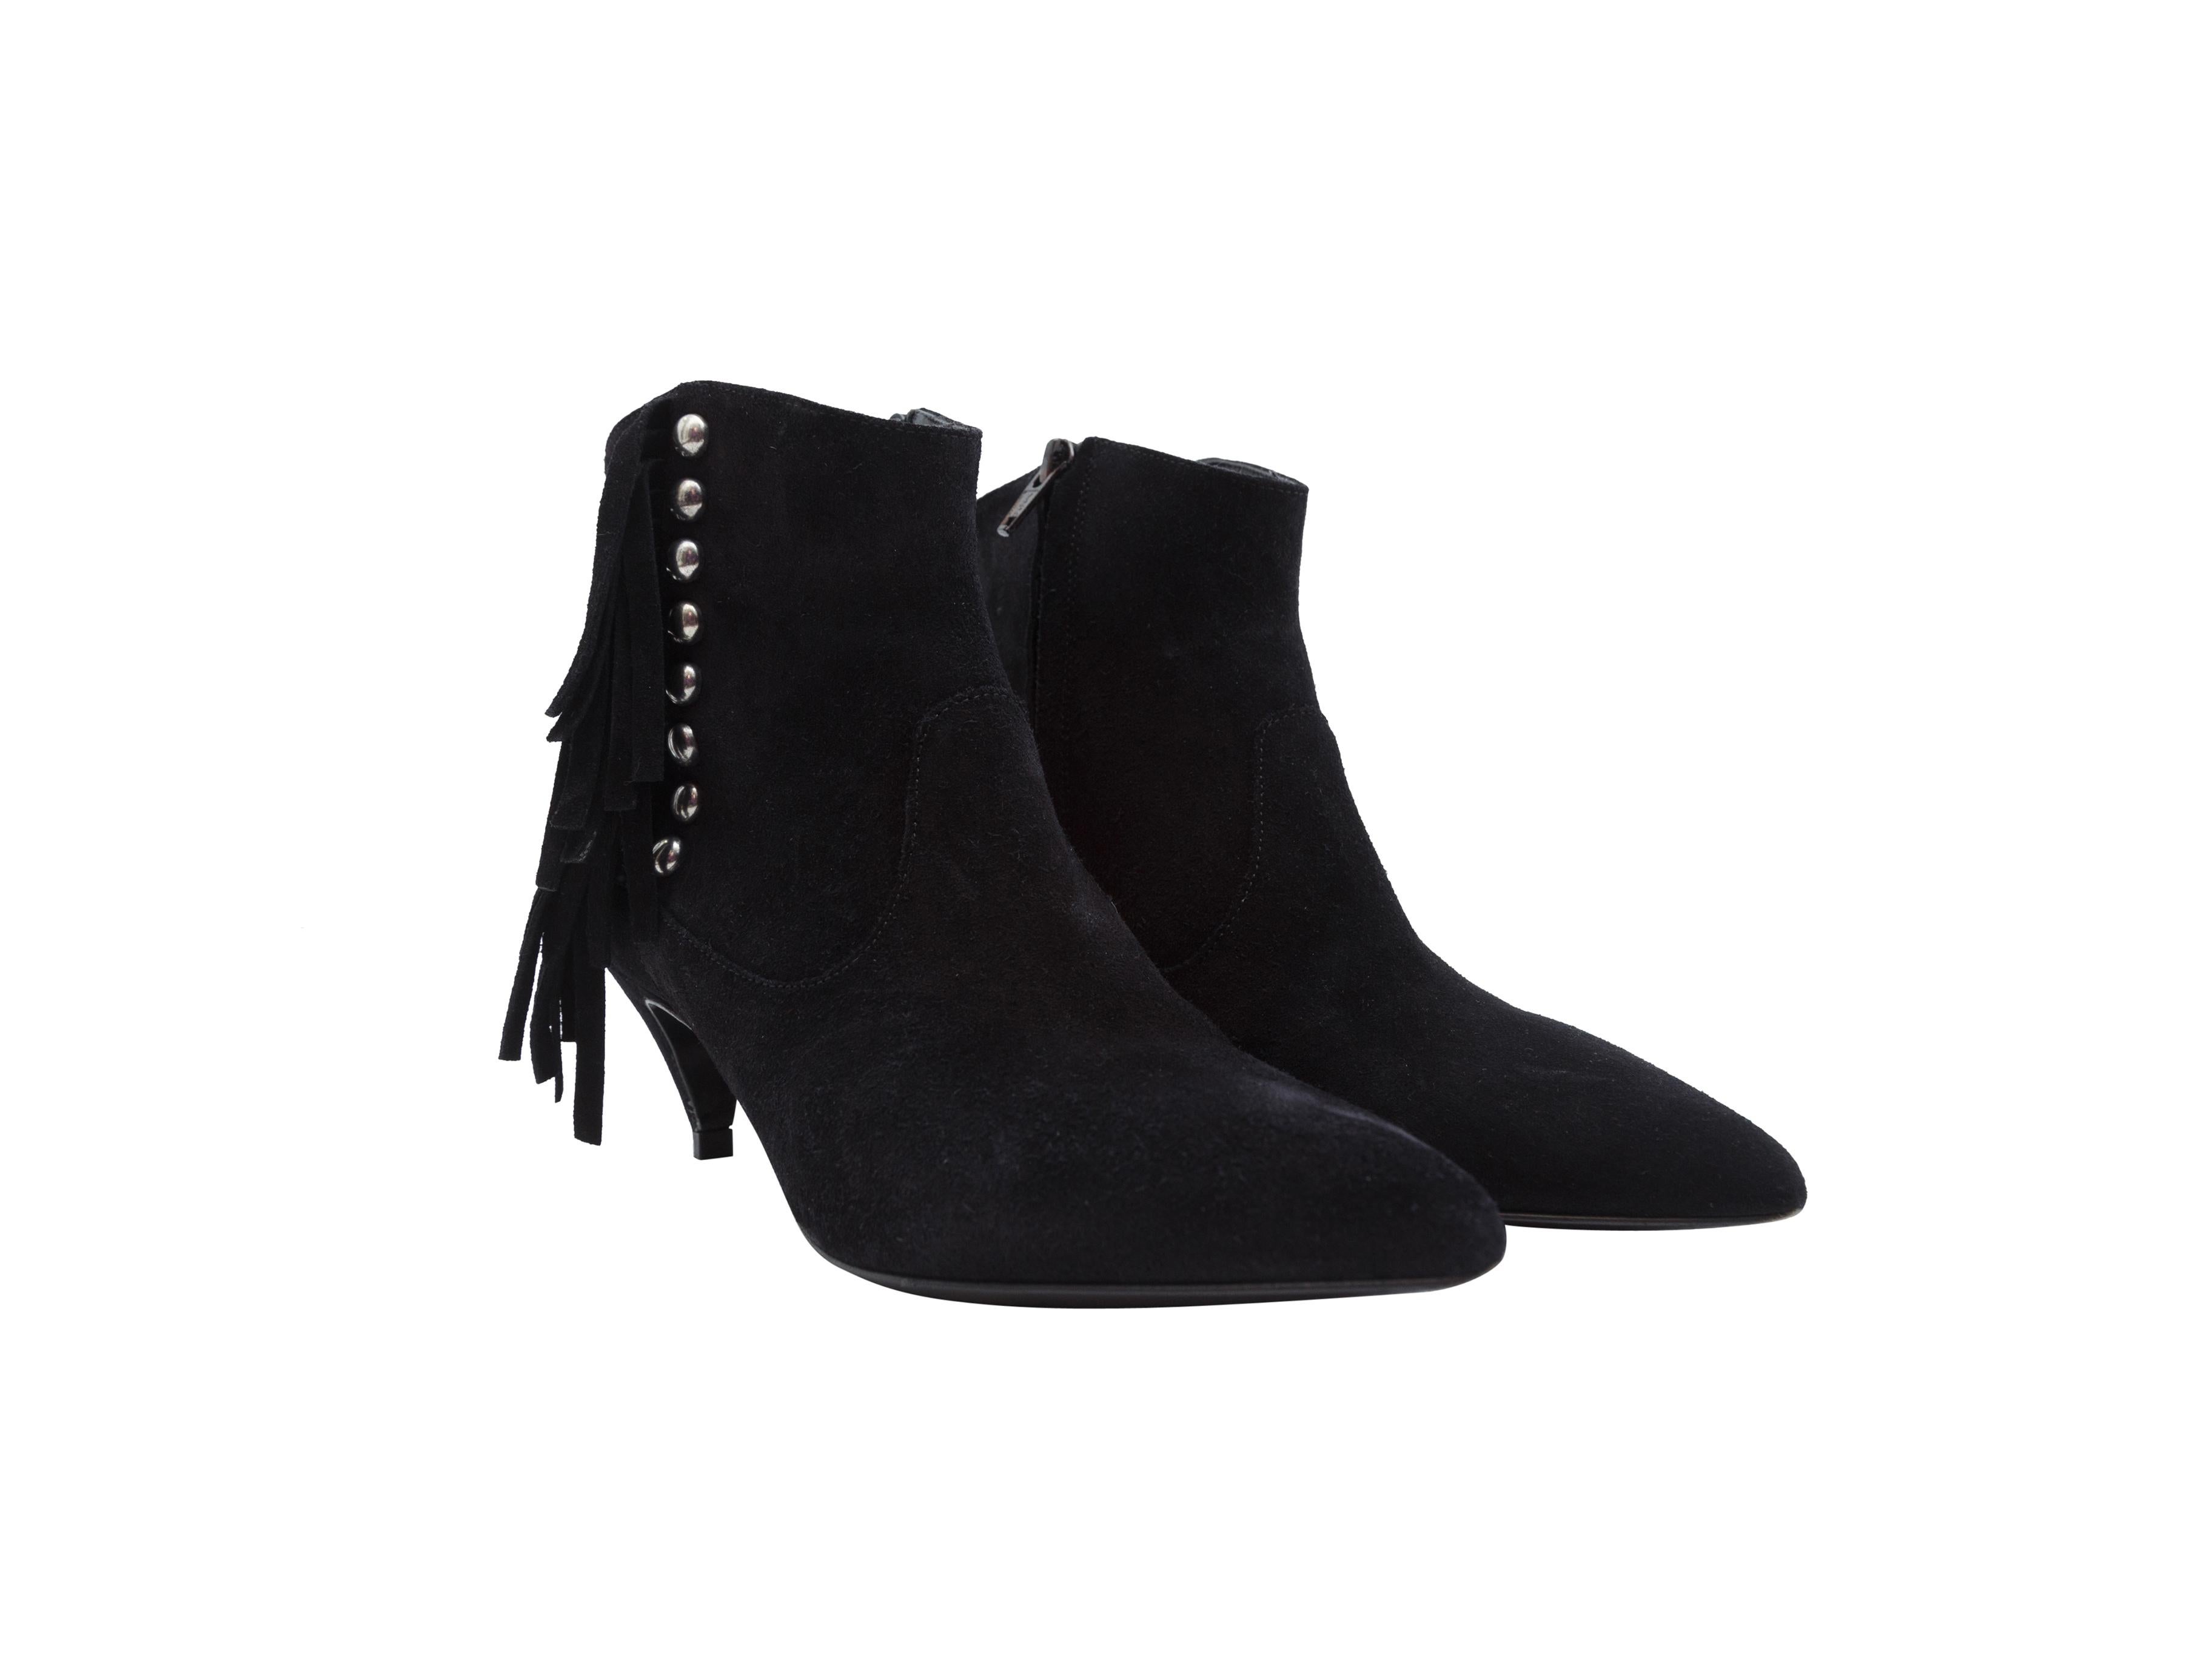 Saint Laurent Black Suede Booties with Fringe In Good Condition In New York, NY